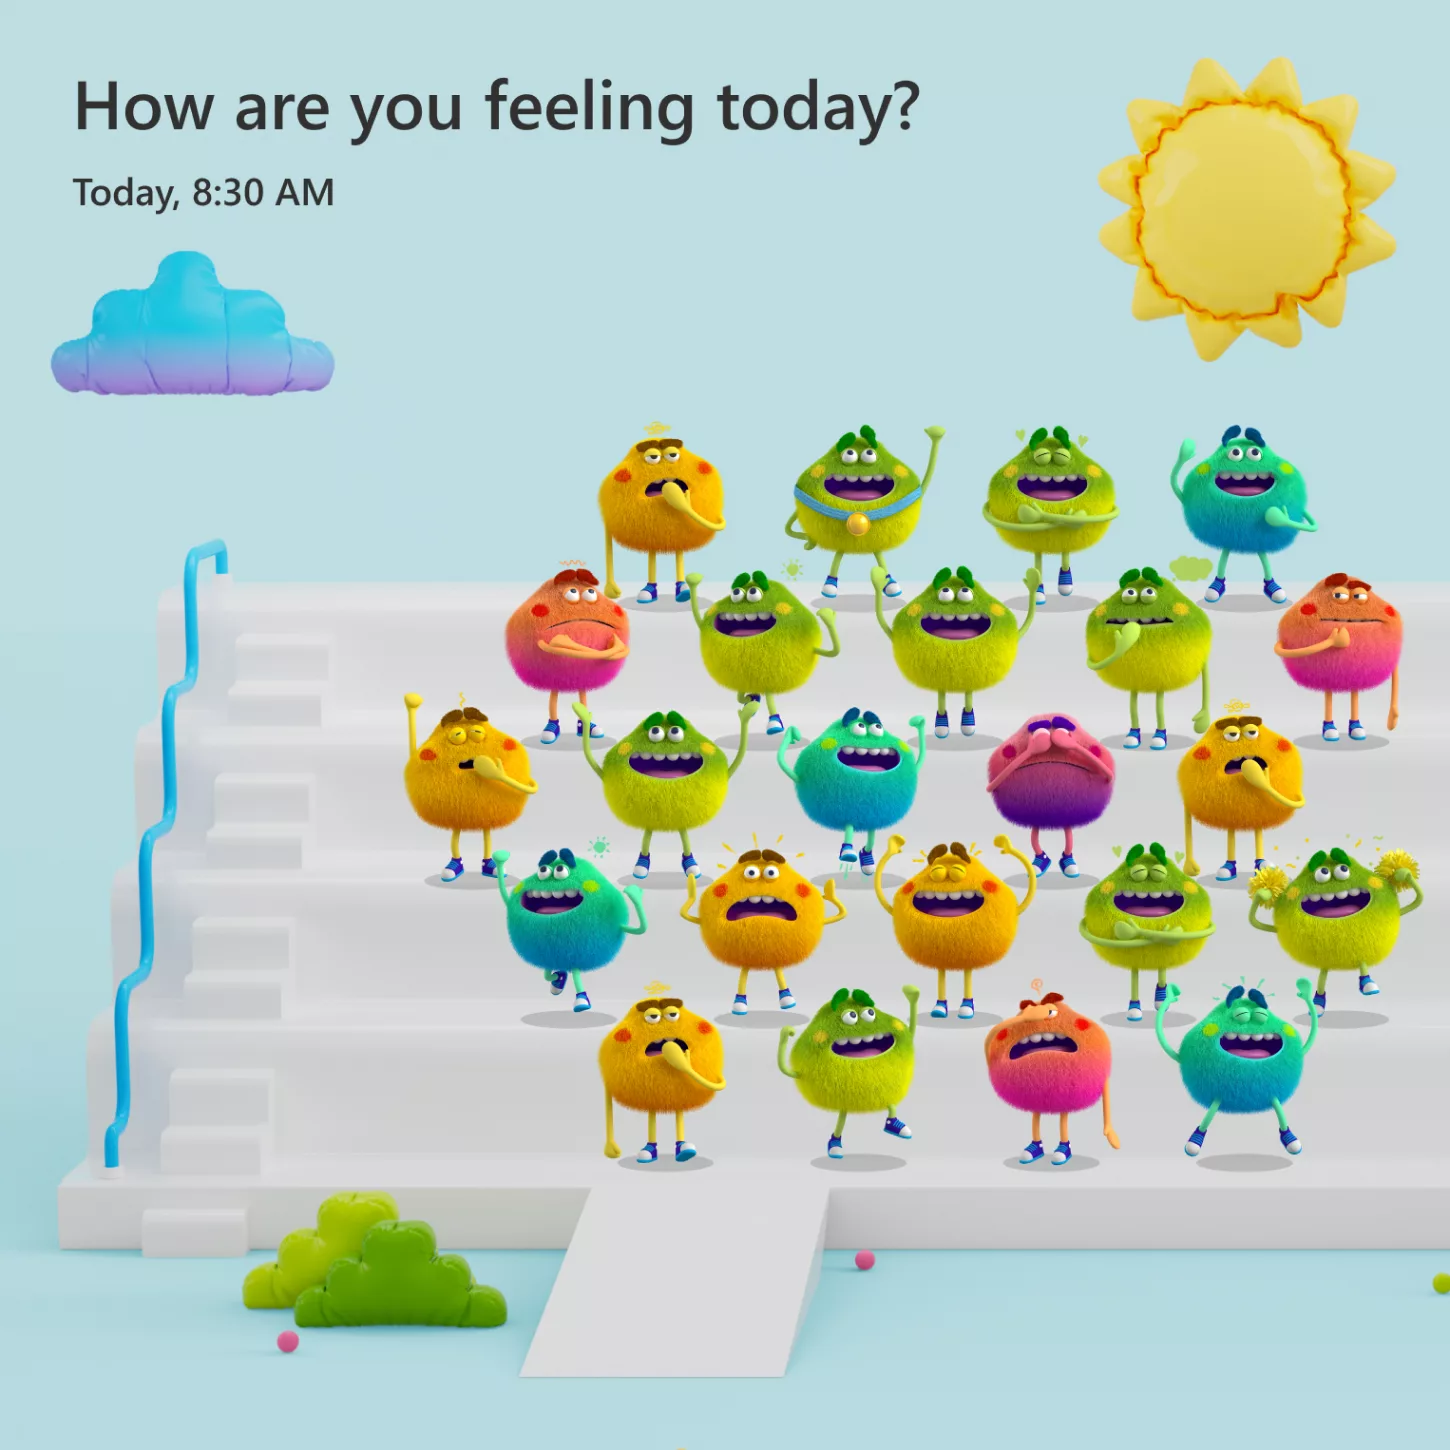 User interface from Microsoft Reflect showing 24 different Feelings Monsters in one view